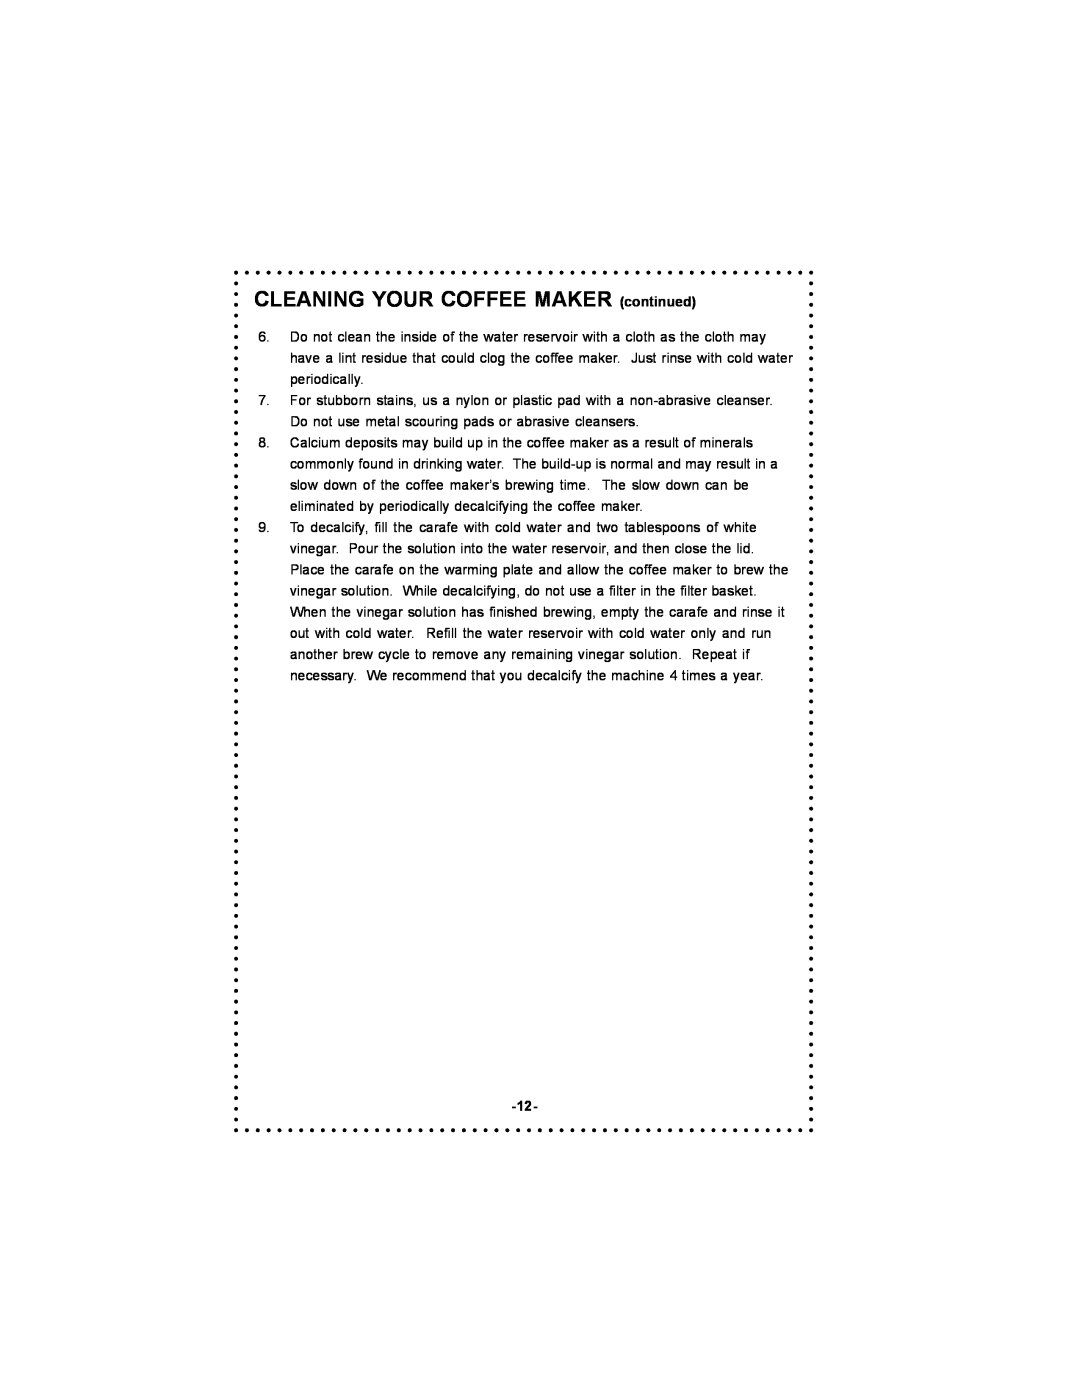 DeLonghi DC54TC, DC55TC instruction manual CLEANING YOUR COFFEE MAKER continued 